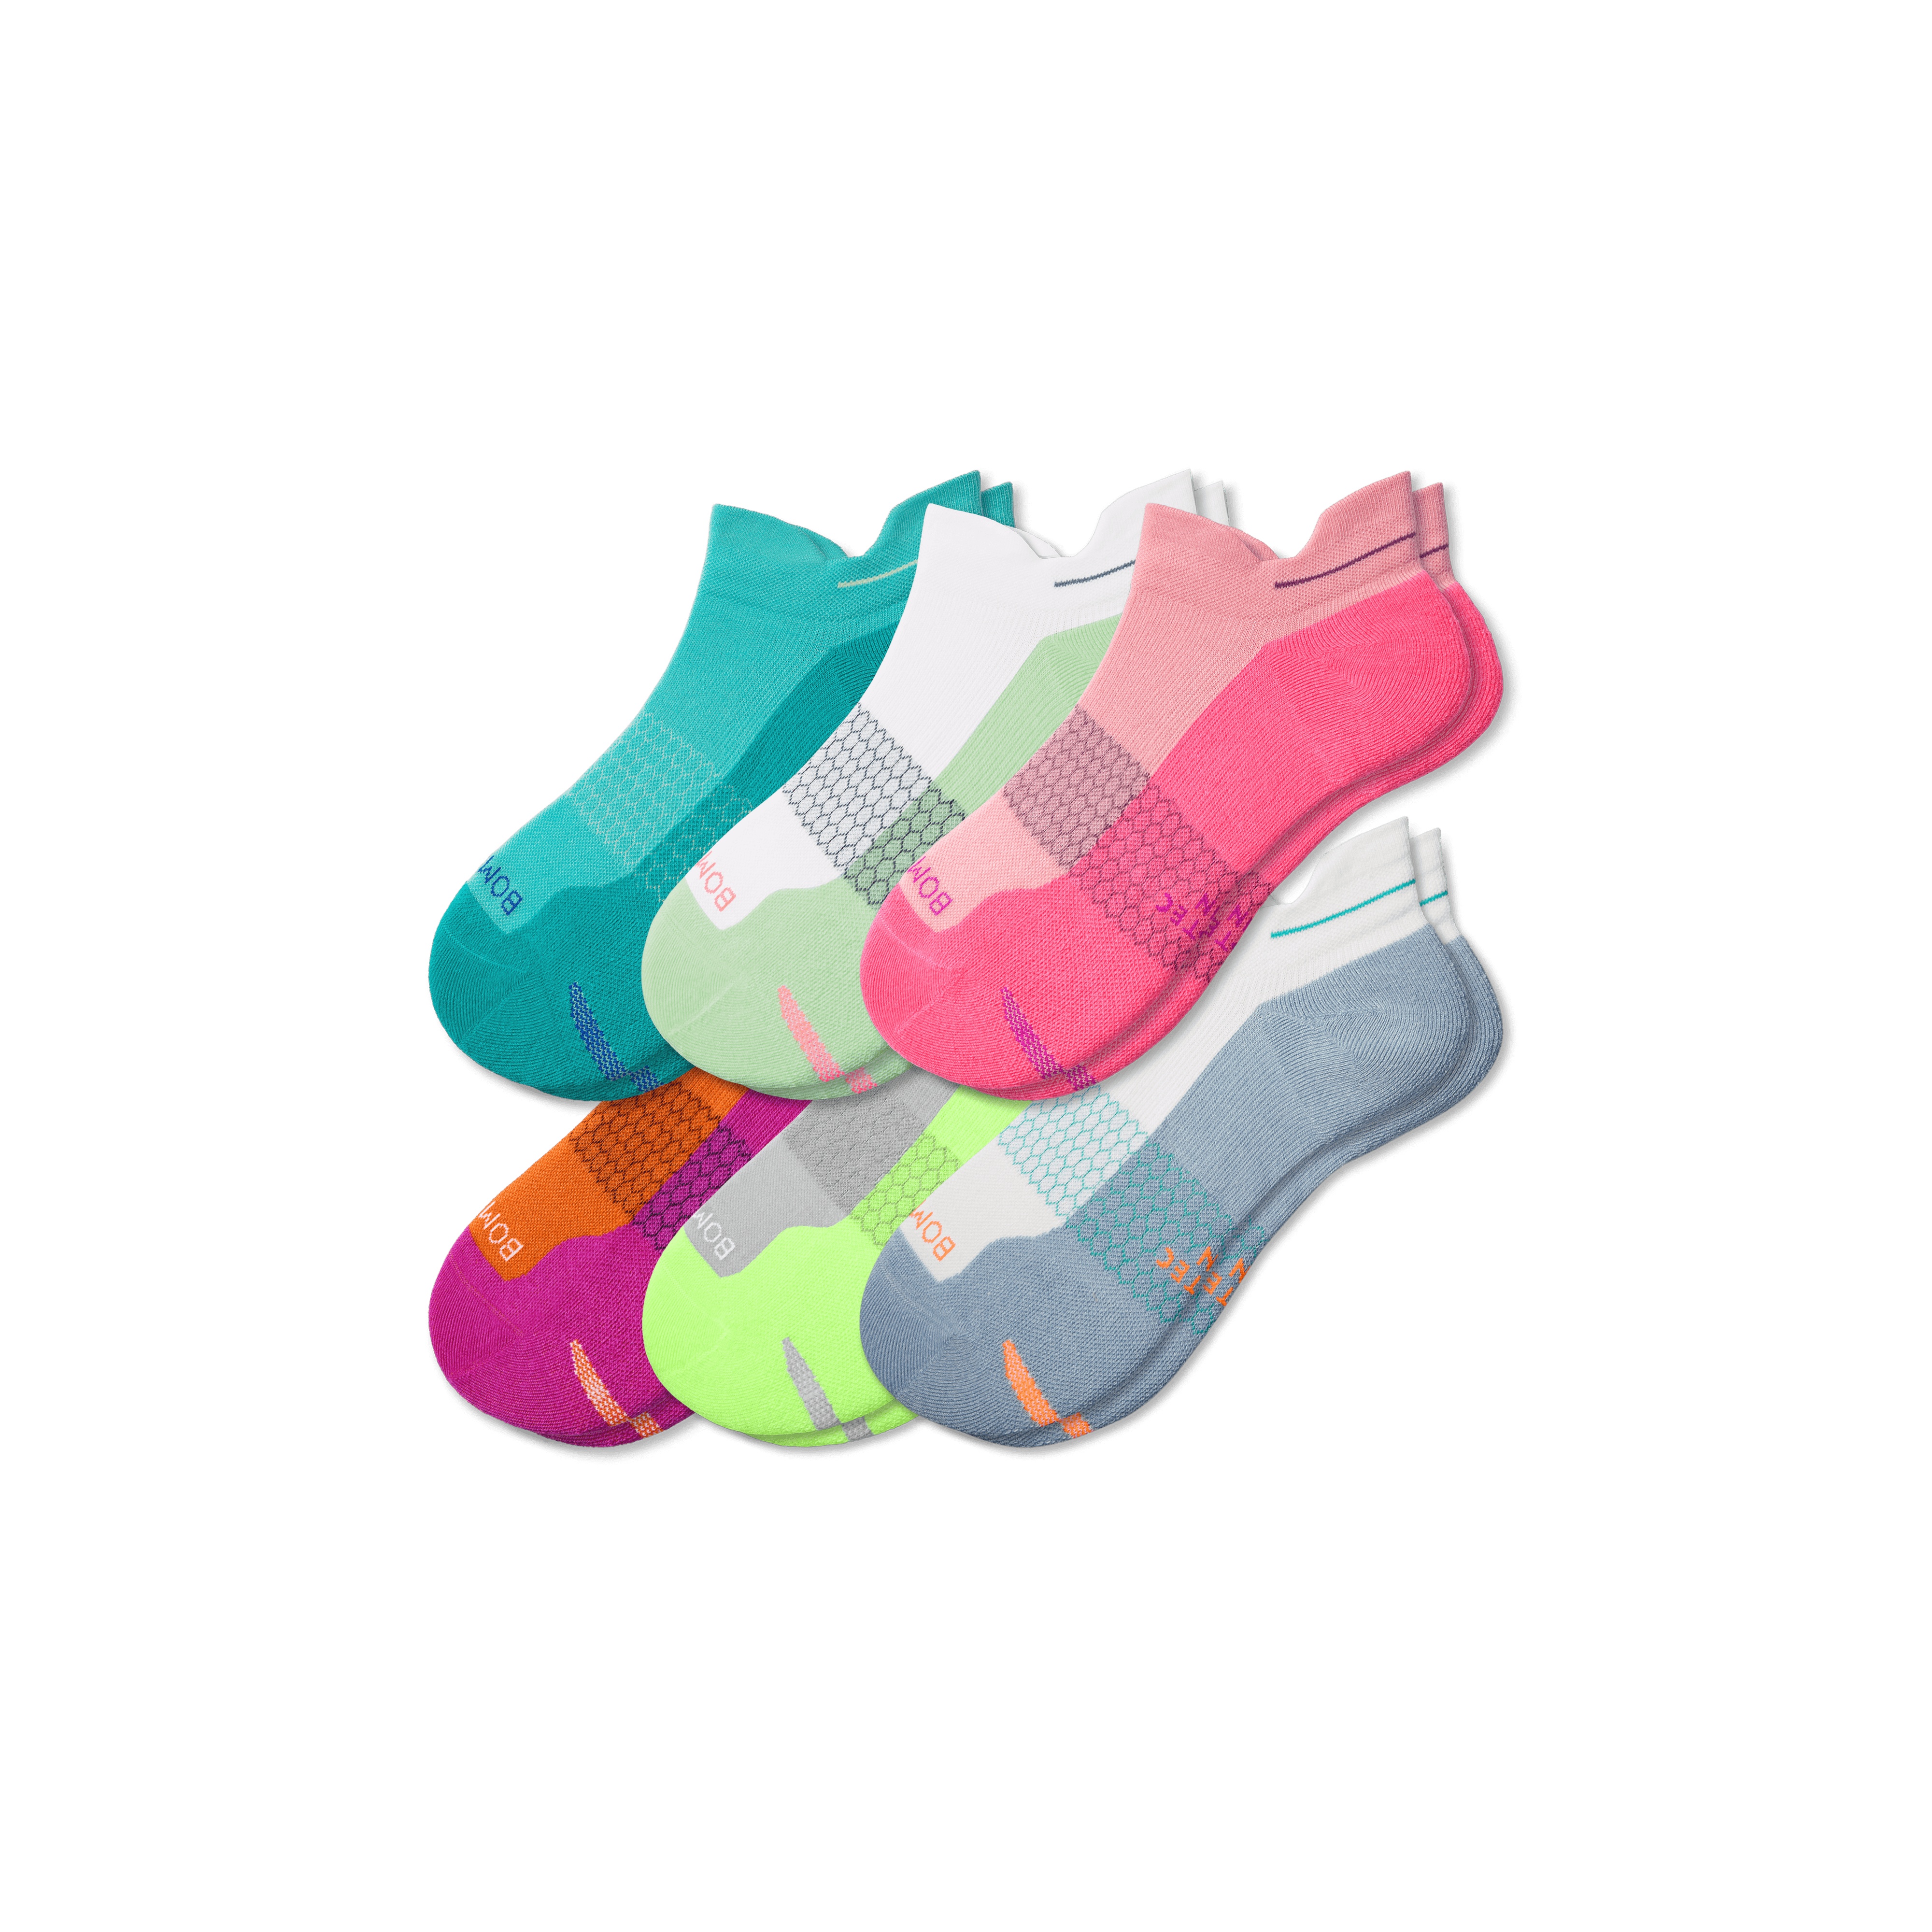 Bombas Running Ankle Sock 6-pack In Pink Mint Mix